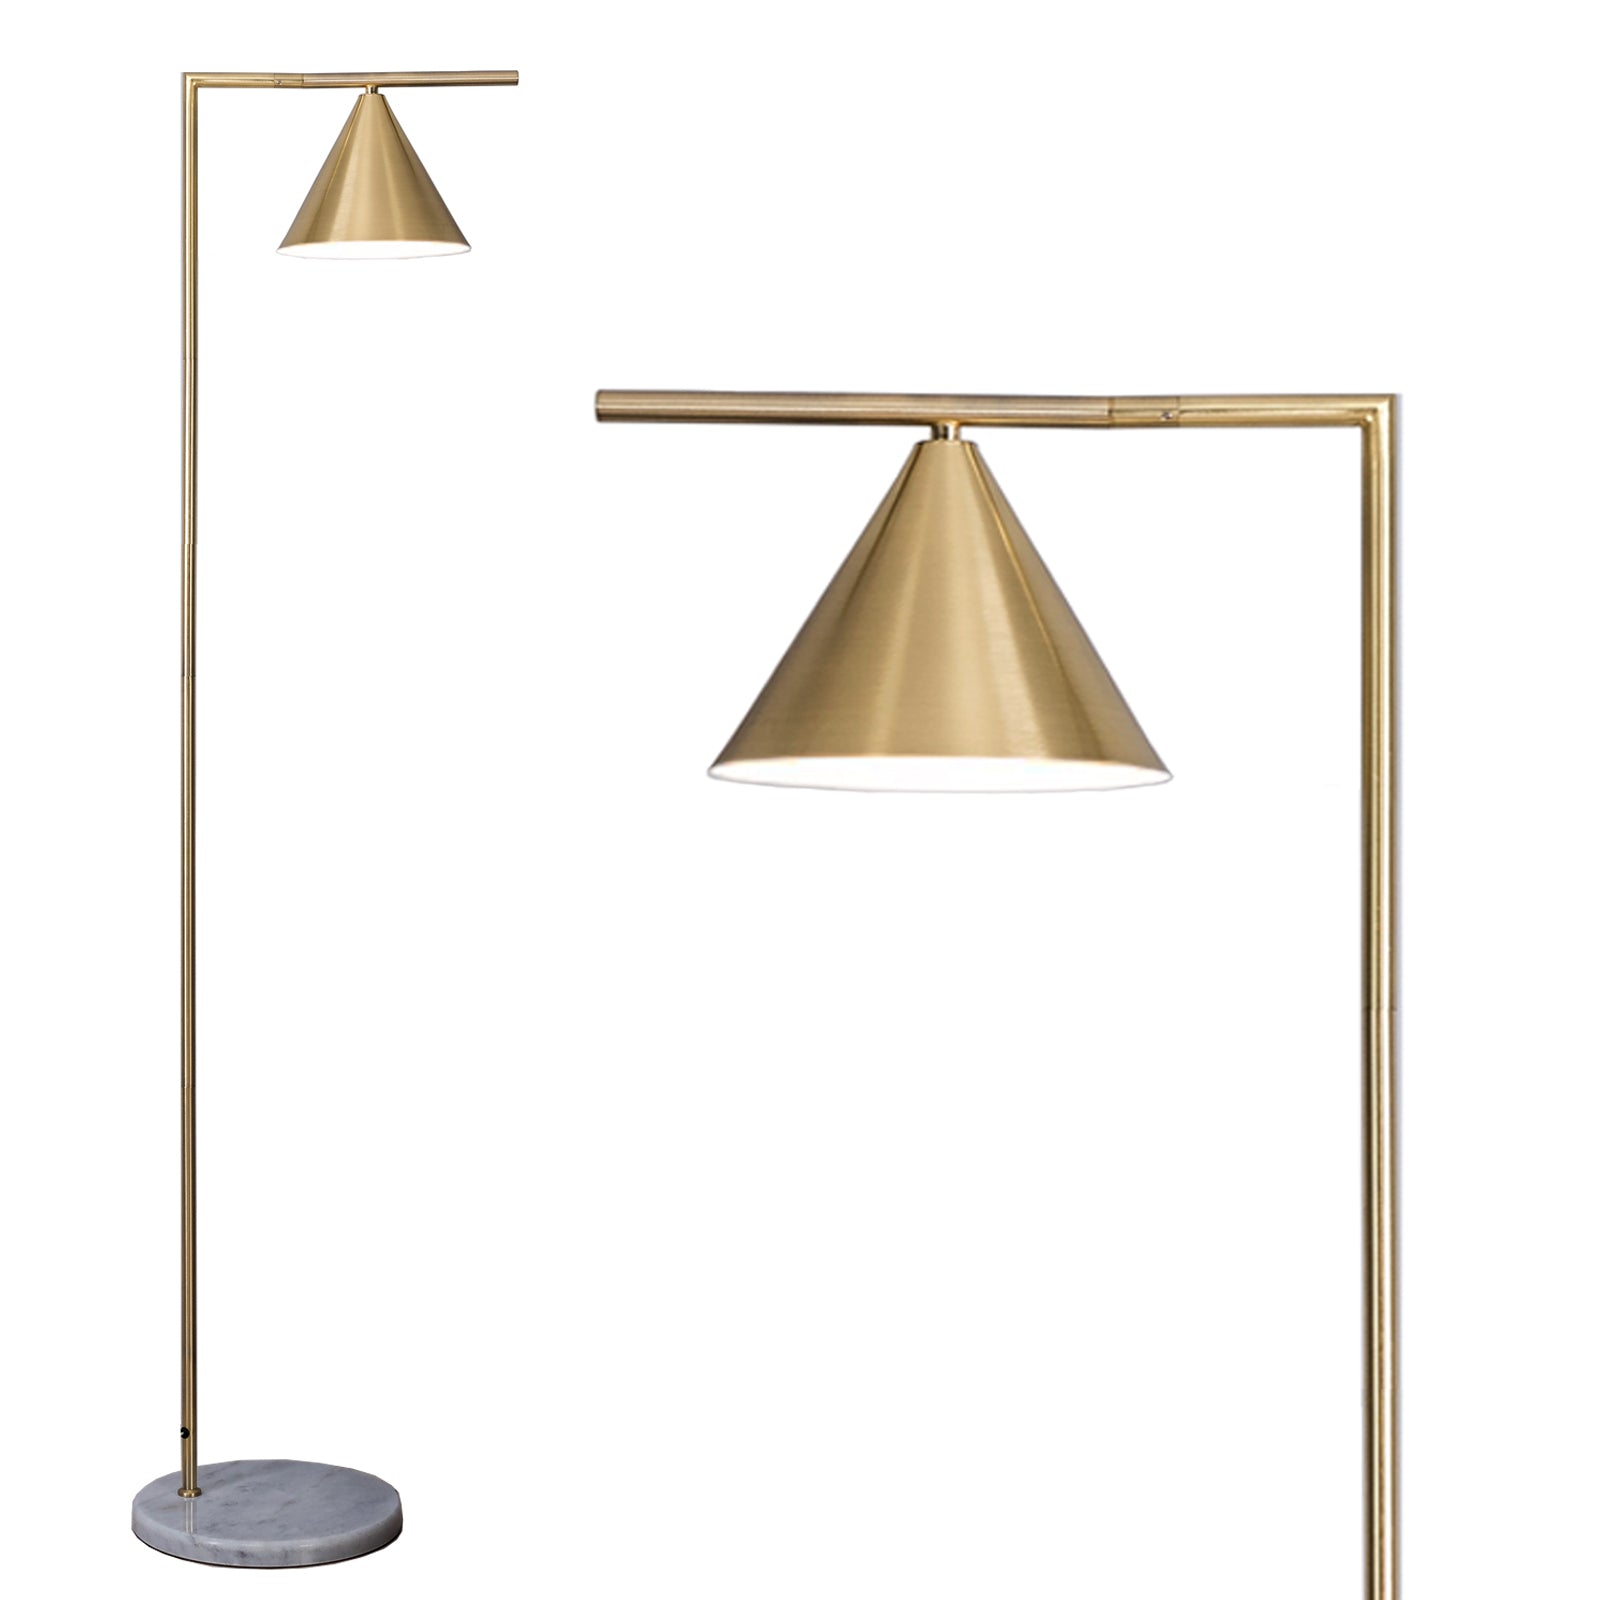 Floor Lamp, Adjustable Cone Shade, On/Off Switch, ECP Plug, Reading Light, Matt Brass Finish And White Marble Base, E27 Bulb Cap